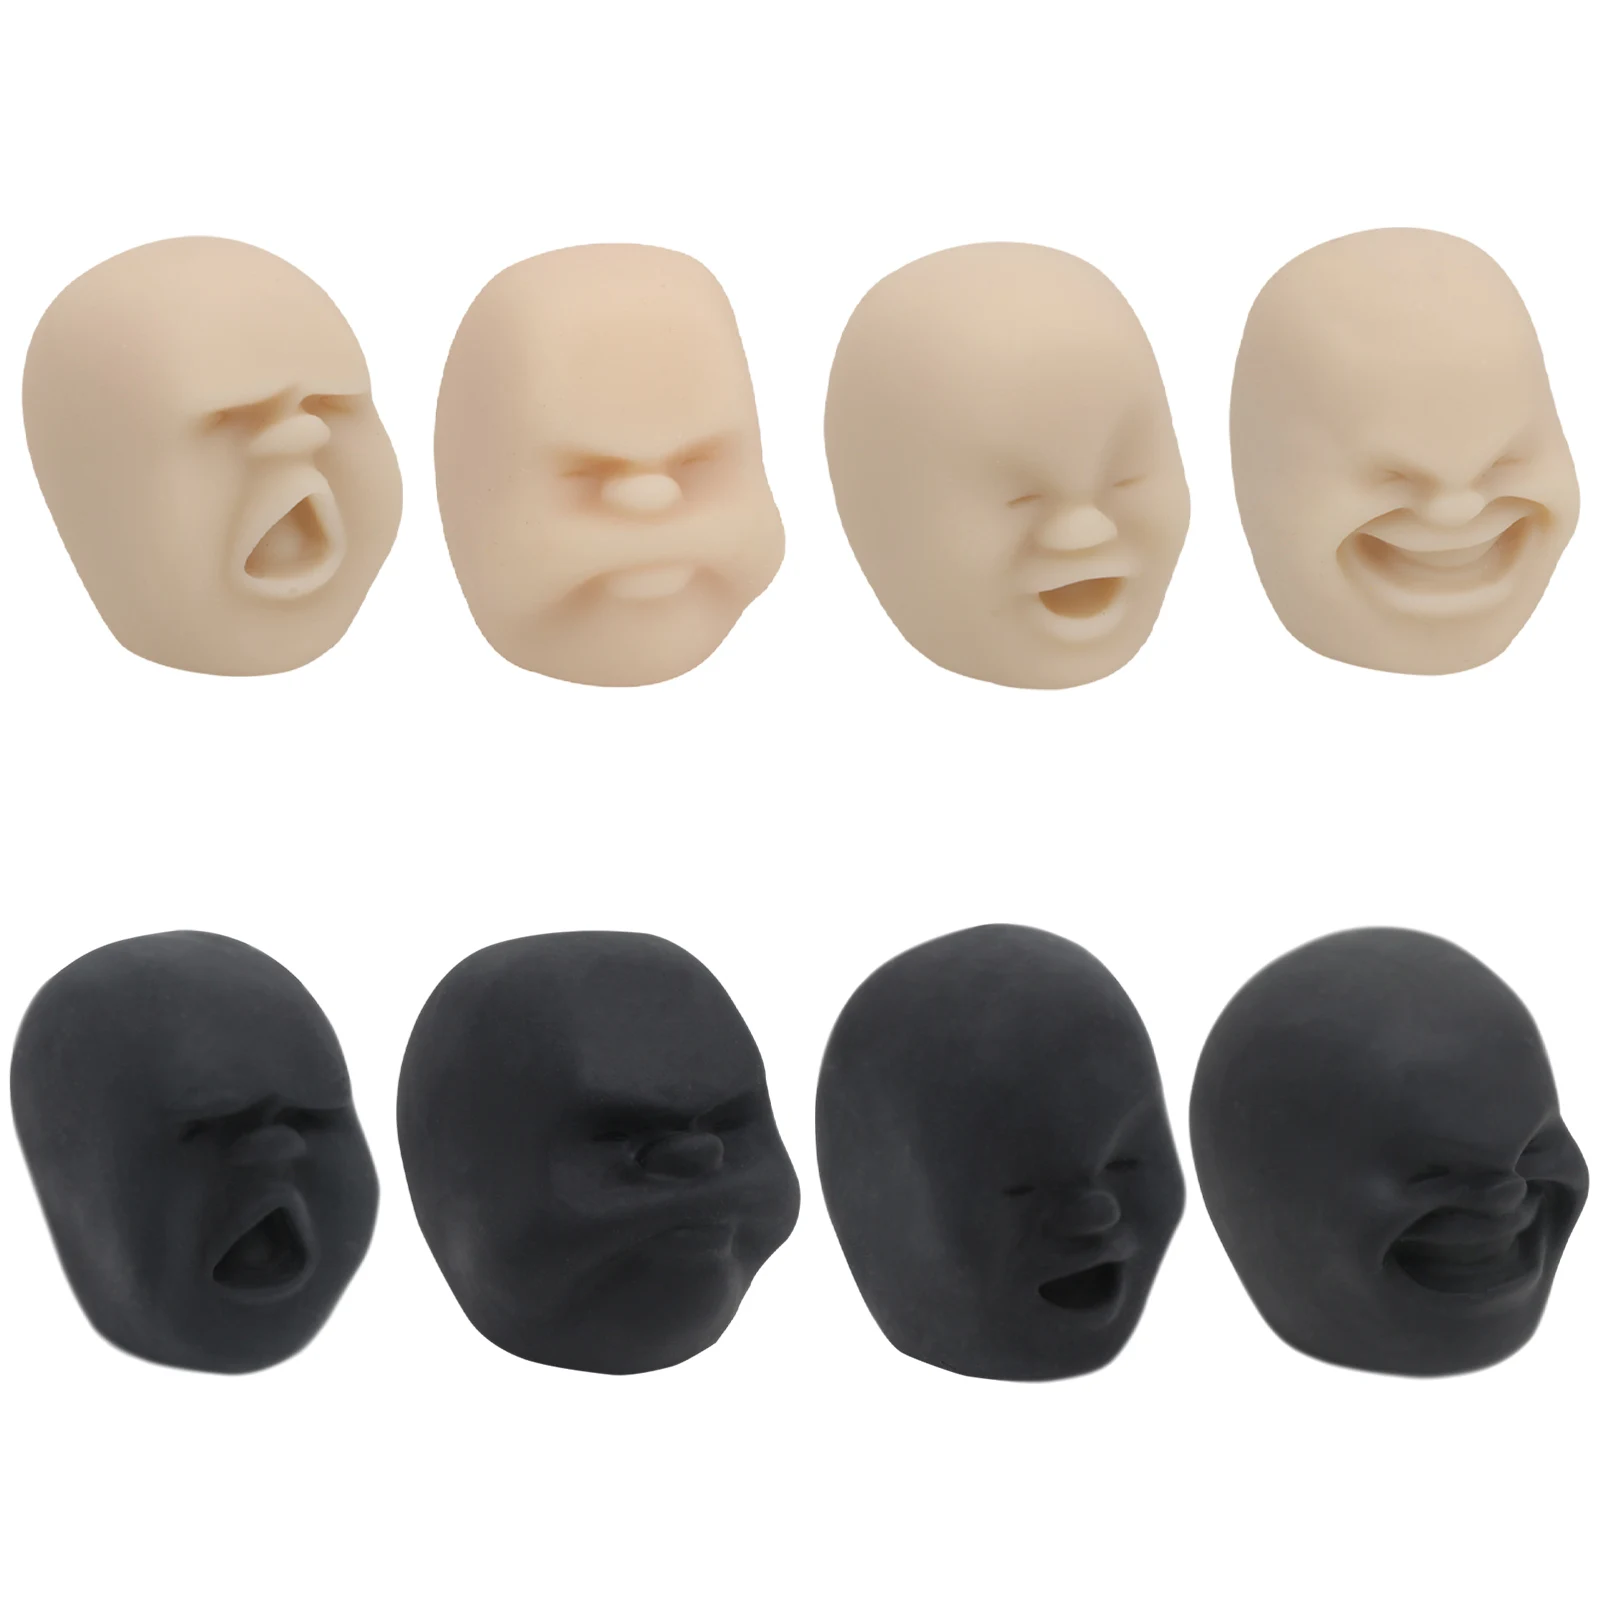 

Human Face Emotion Vent Ball Squishy Toy Fun Novelty Antistress Ball Toy Adult Stress Relieve Toys Gift Fidget Toys For Anxiety